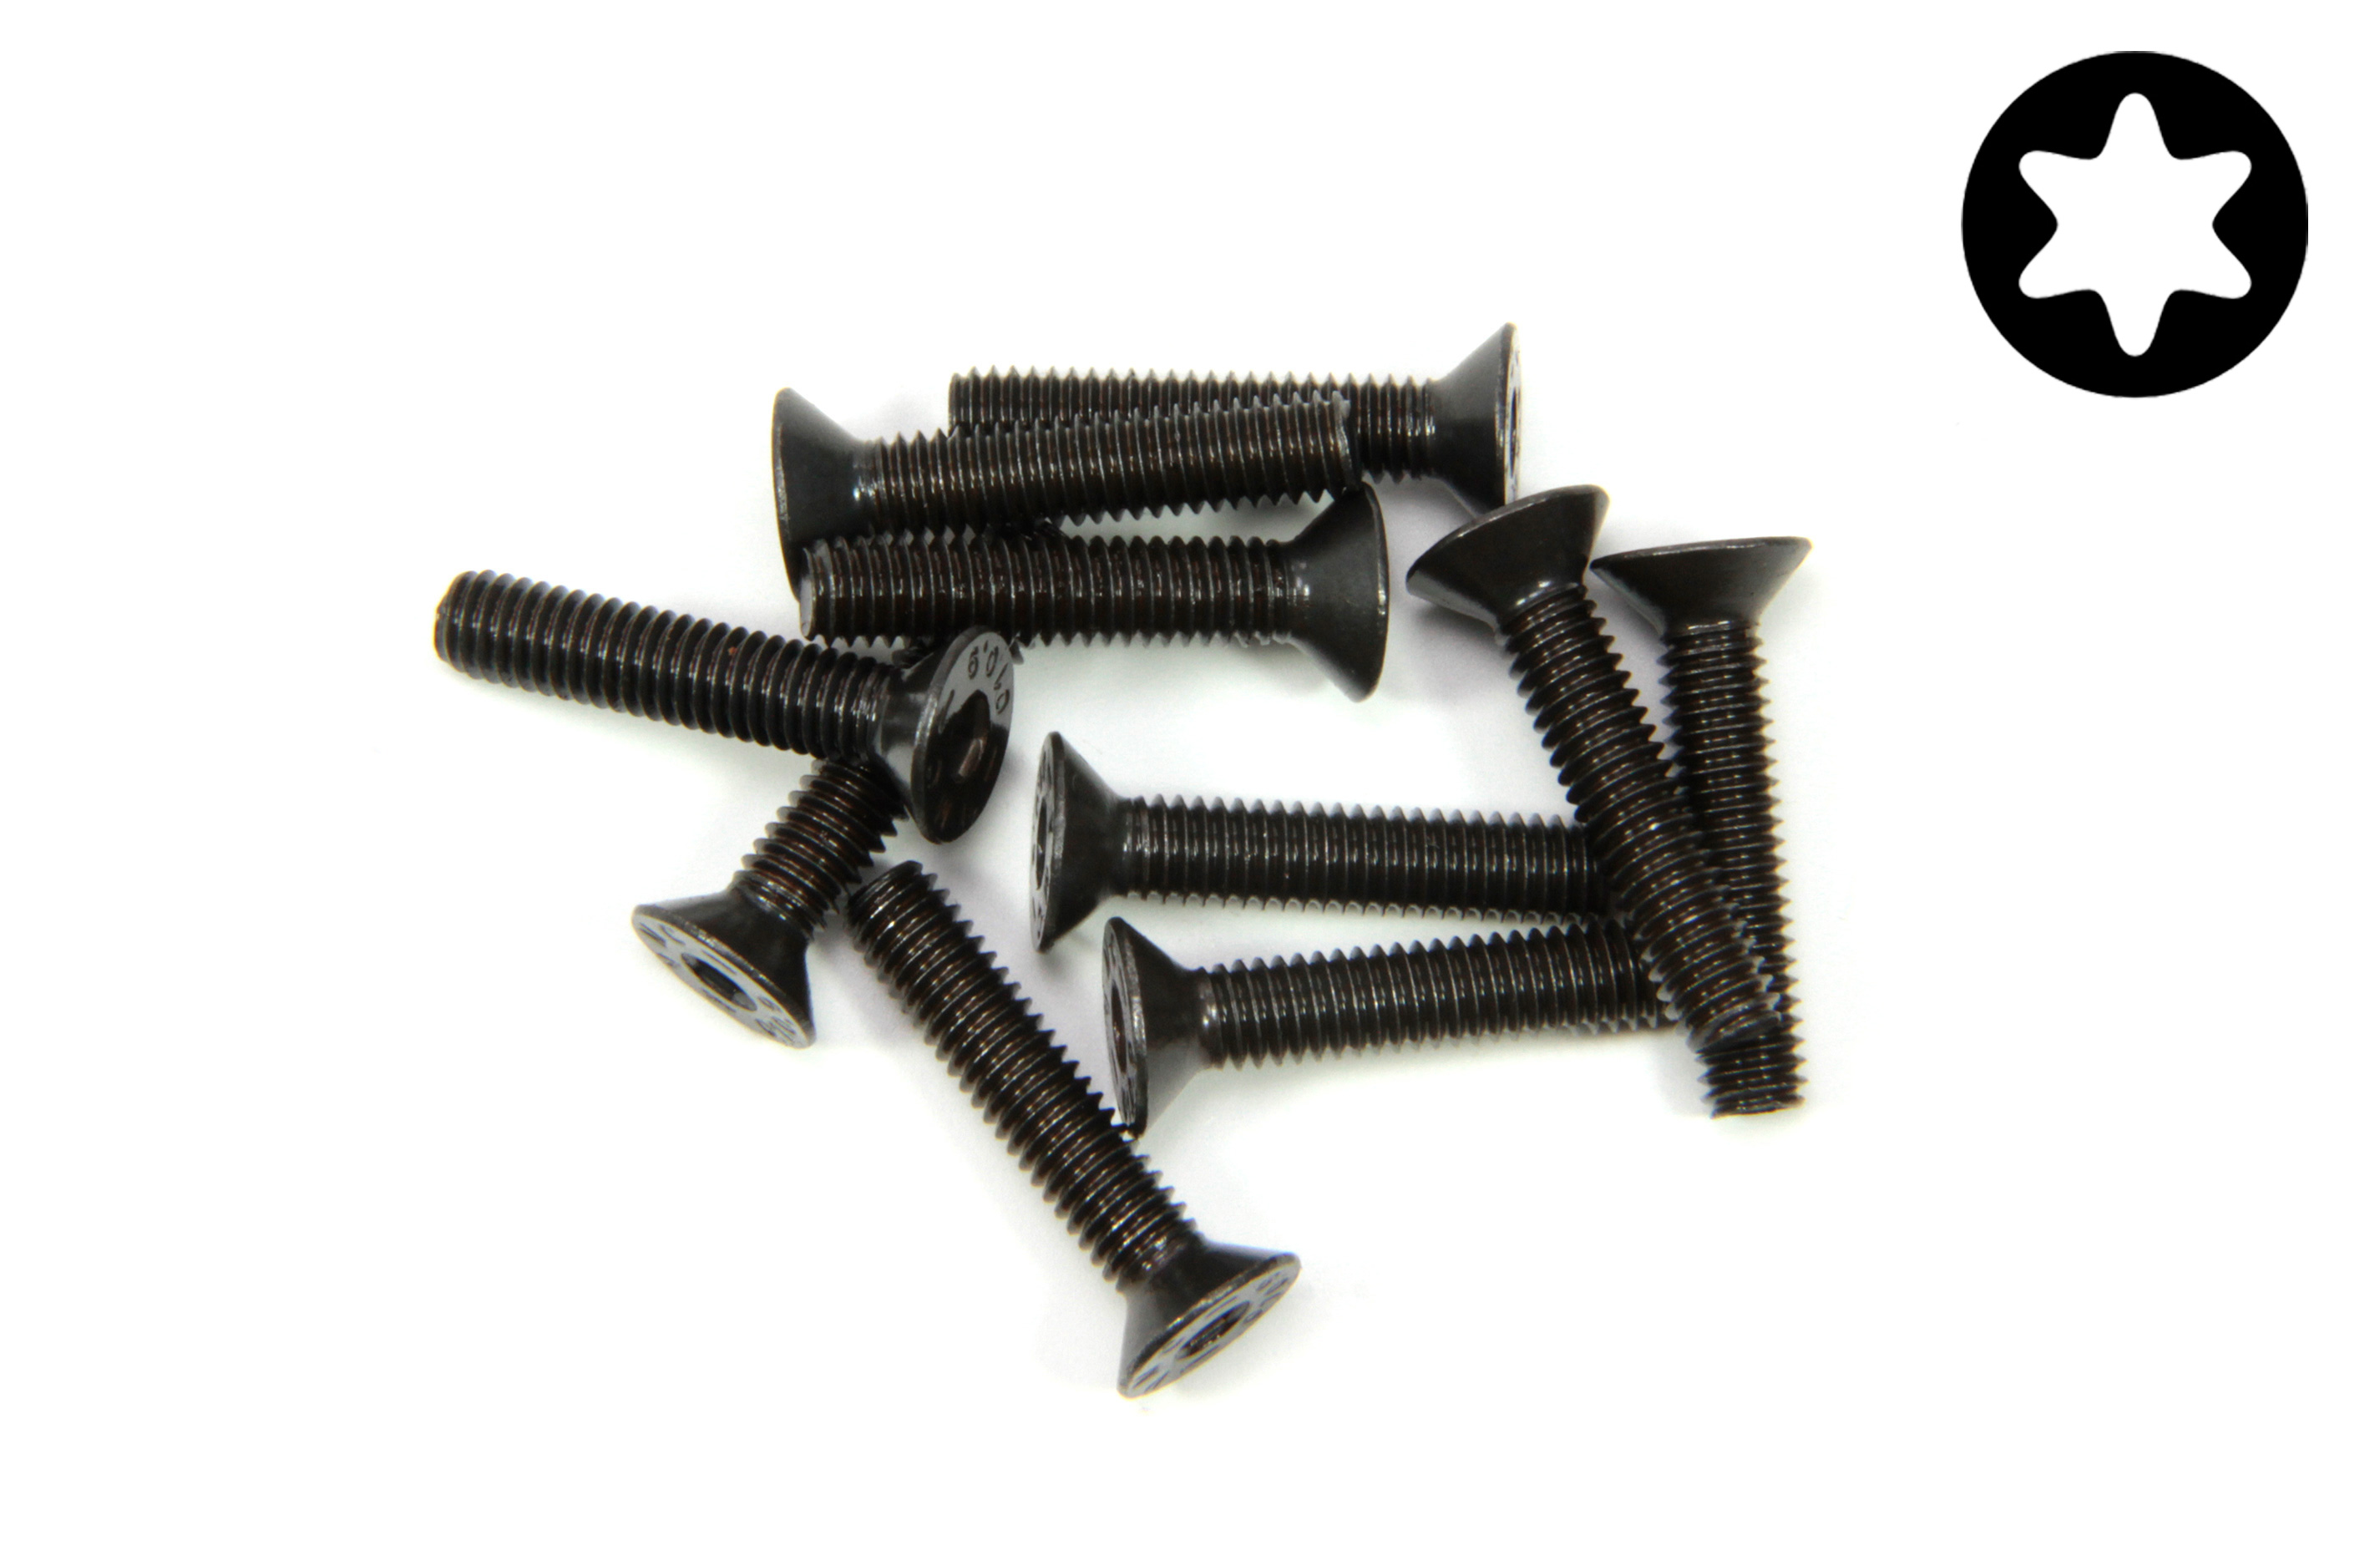 y6920/20-10.9 Countersunk screw with Torx M4 x 20 mm, strength 10.9, 10 pieces